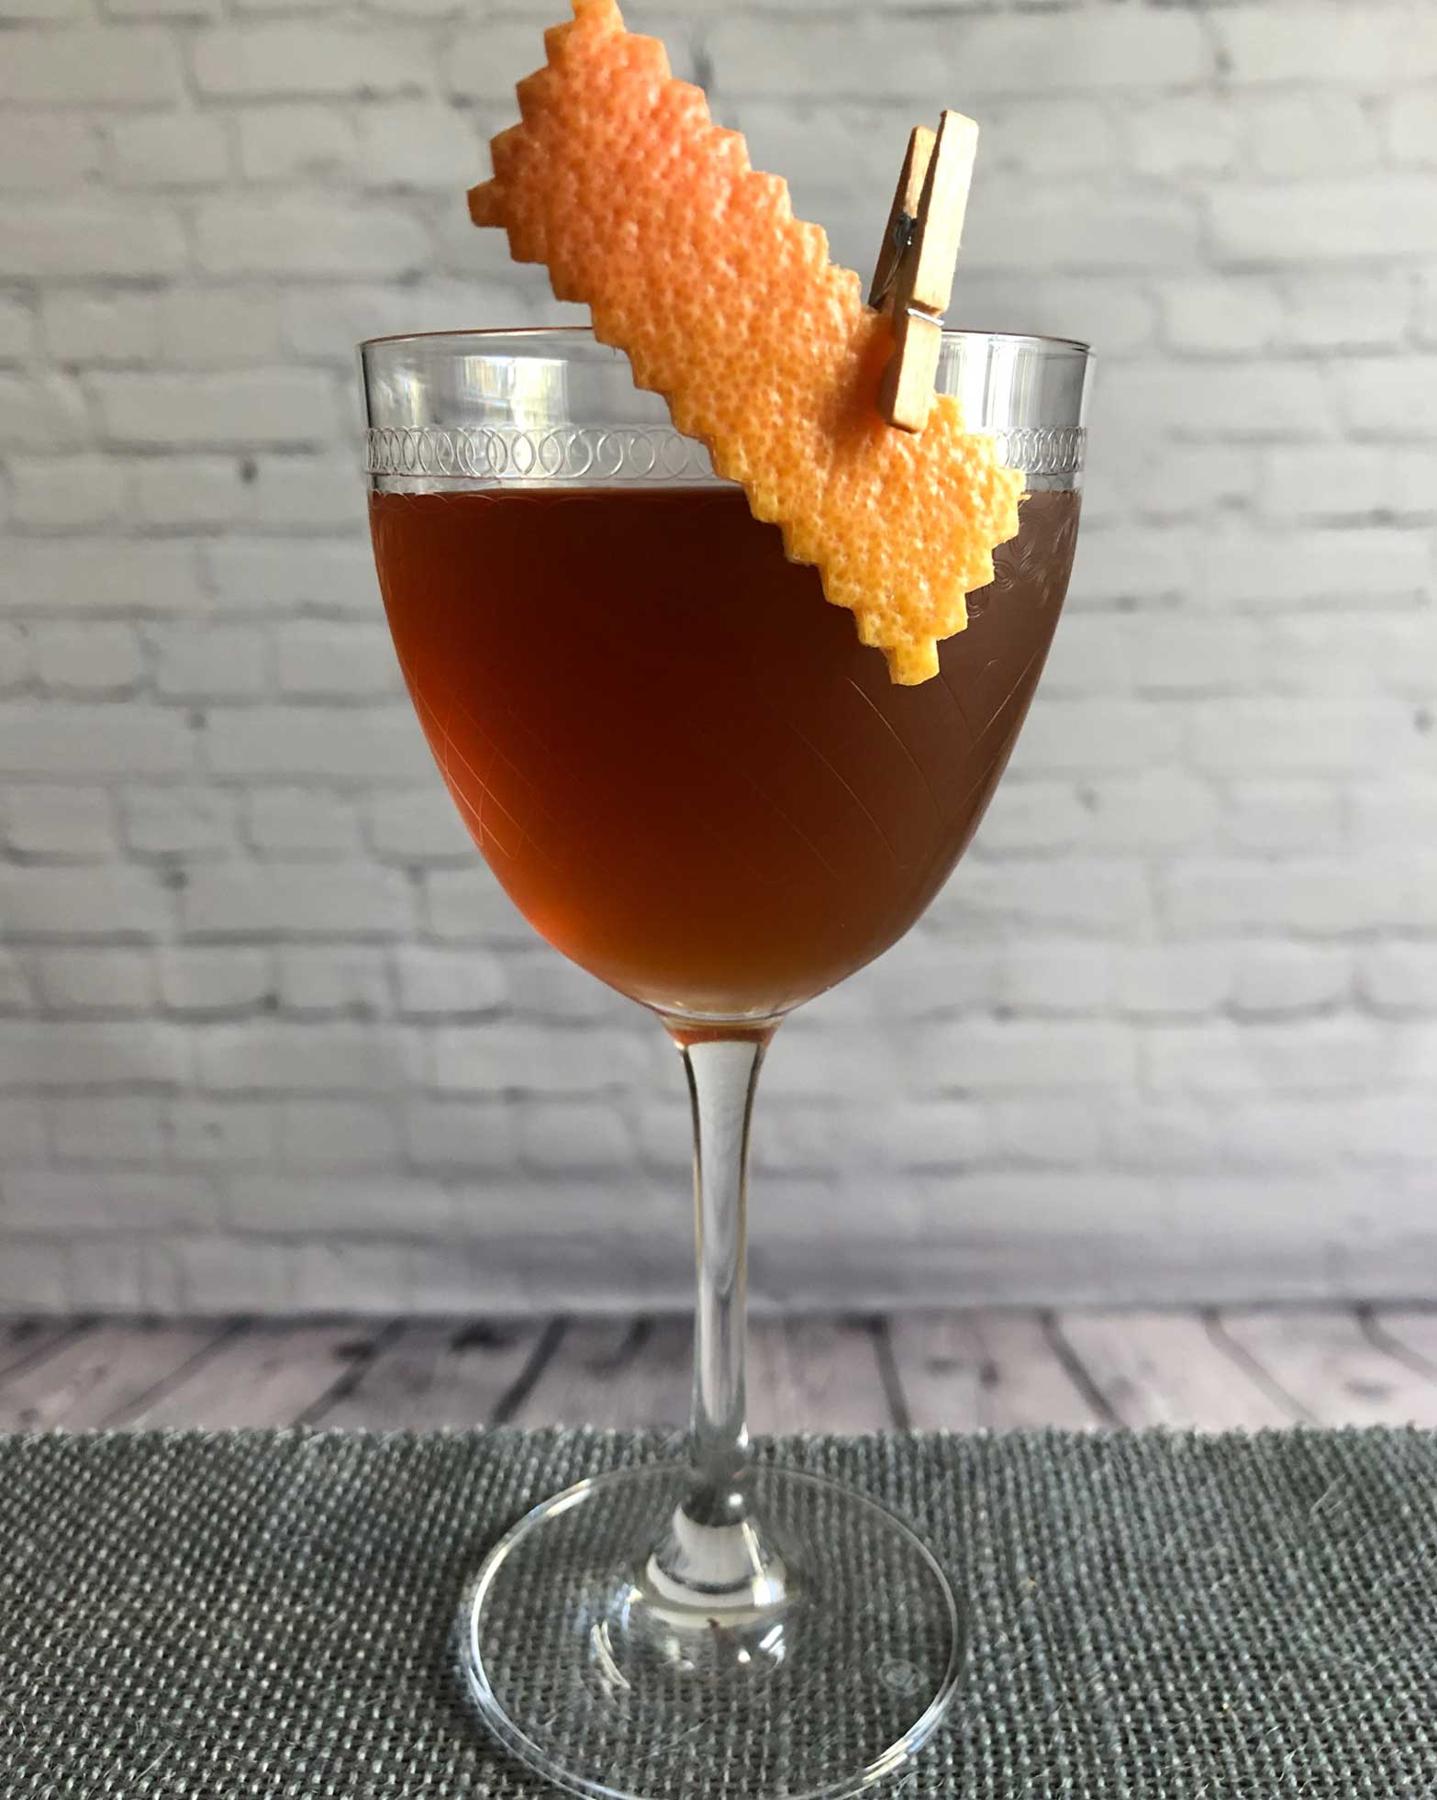 An example of the All the Difference, the mixed drink (drink) featuring rye whiskey, Mattei Cap Corse Rouge Quinquina, Amaro Sfumato Rabarbaro, and grapefruit twist; photo by Lee Edwards